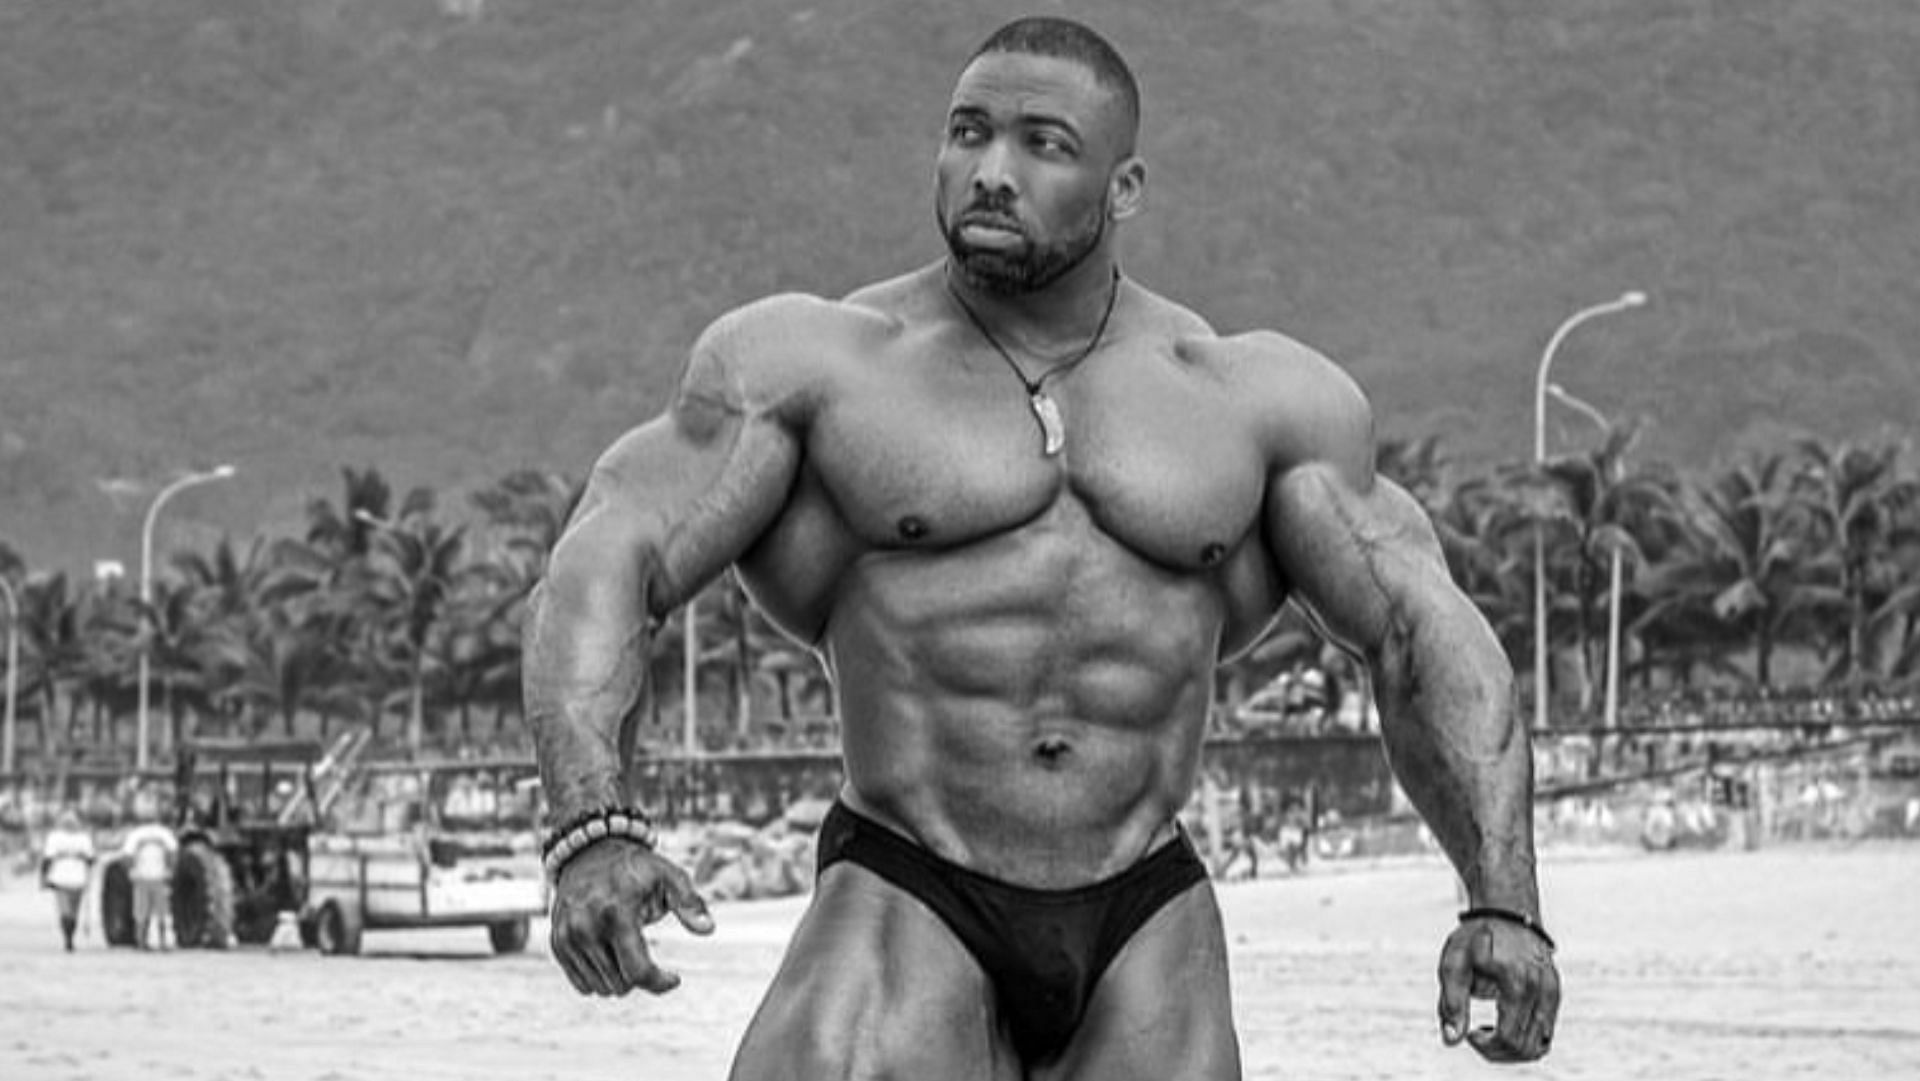 All about Cedric McMillan